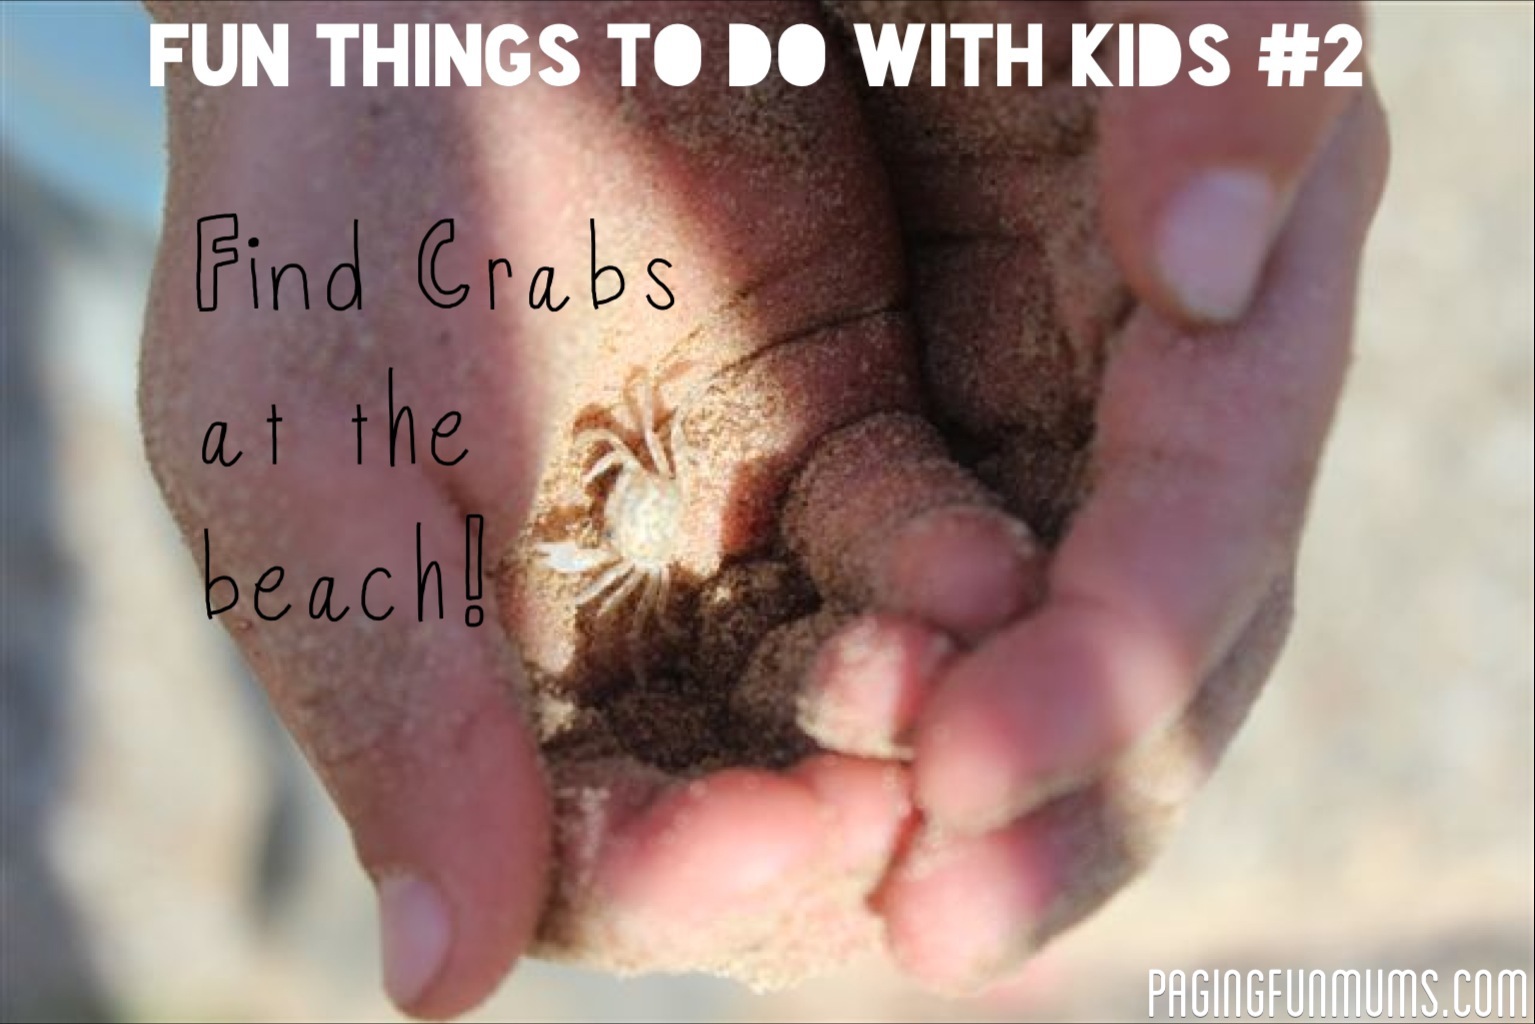 Find Crabs at the Beach!